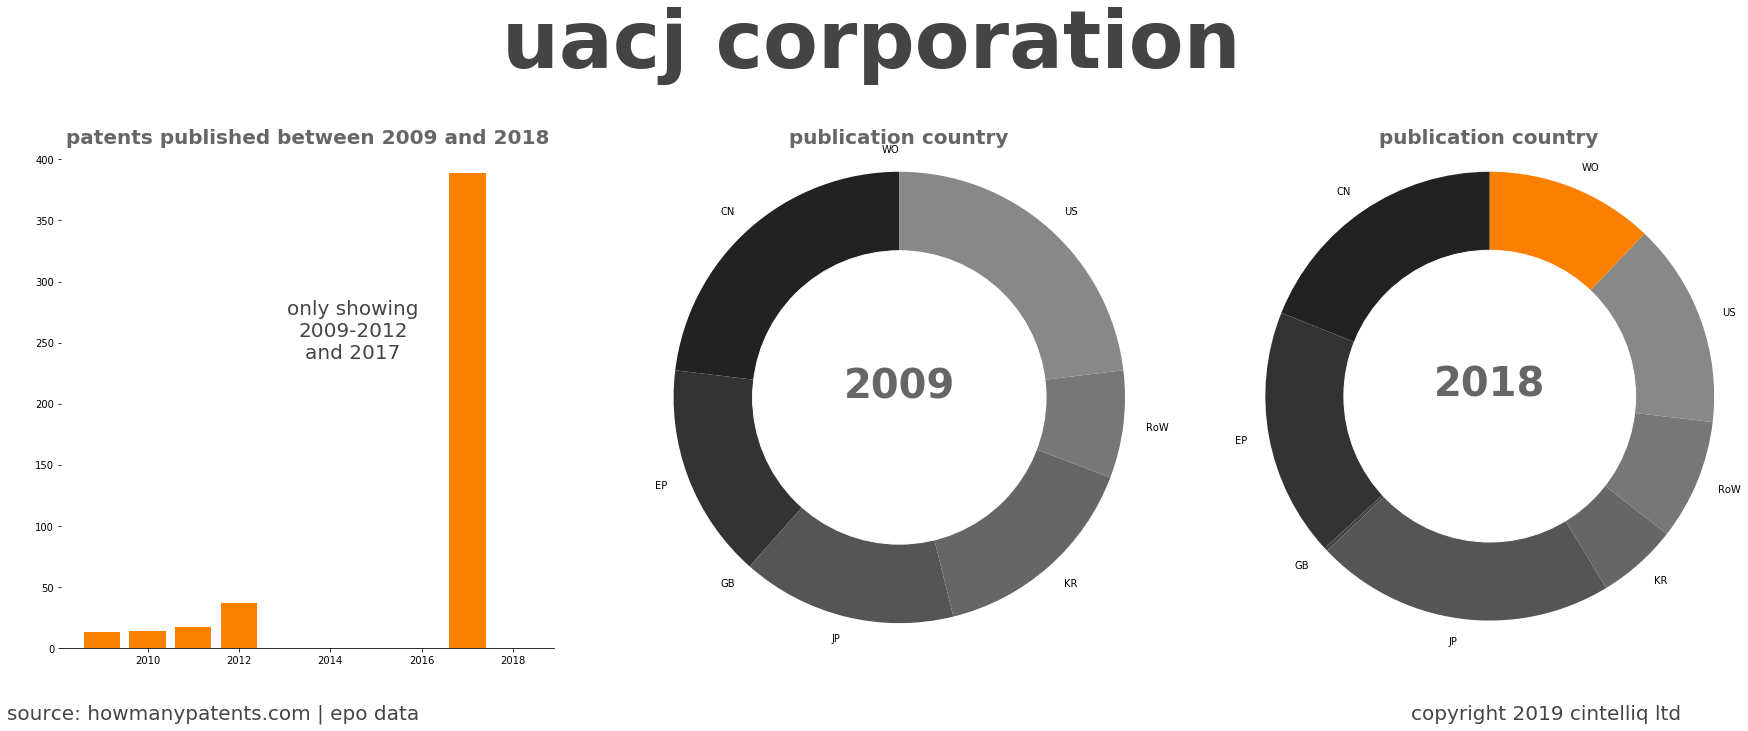 summary of patents for Uacj Corporation